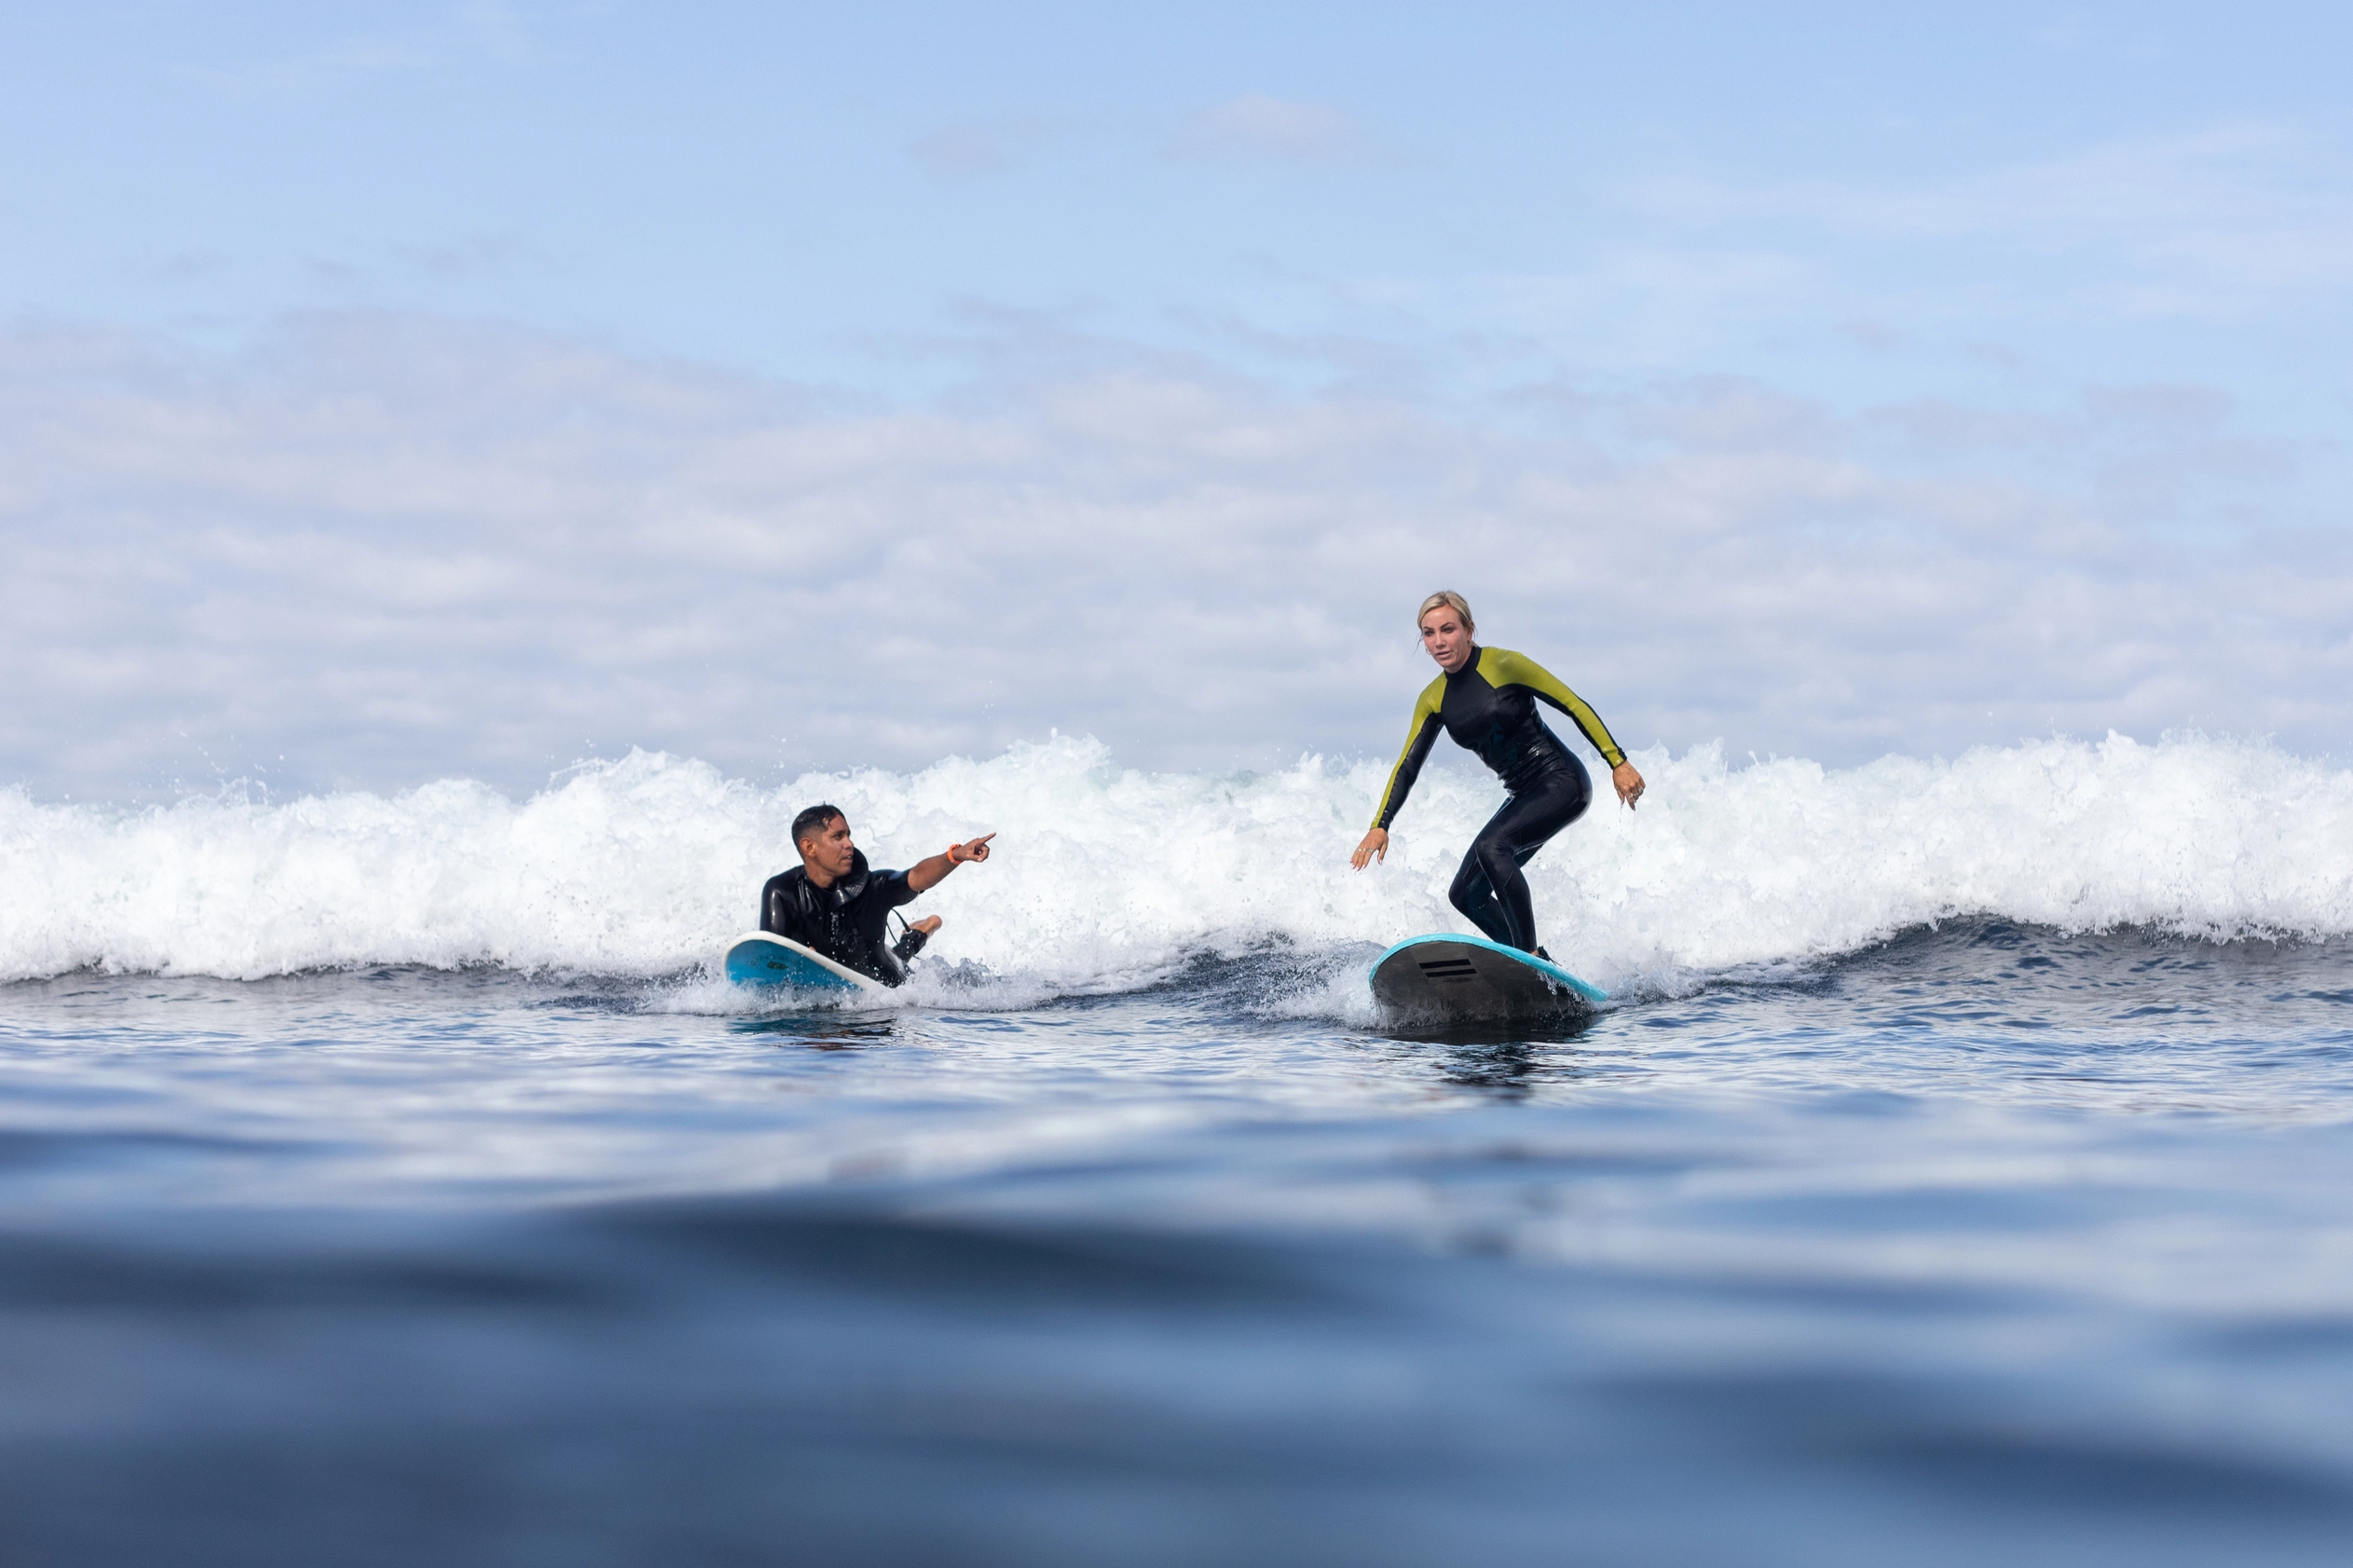 Surfing Lessons in Tenerife